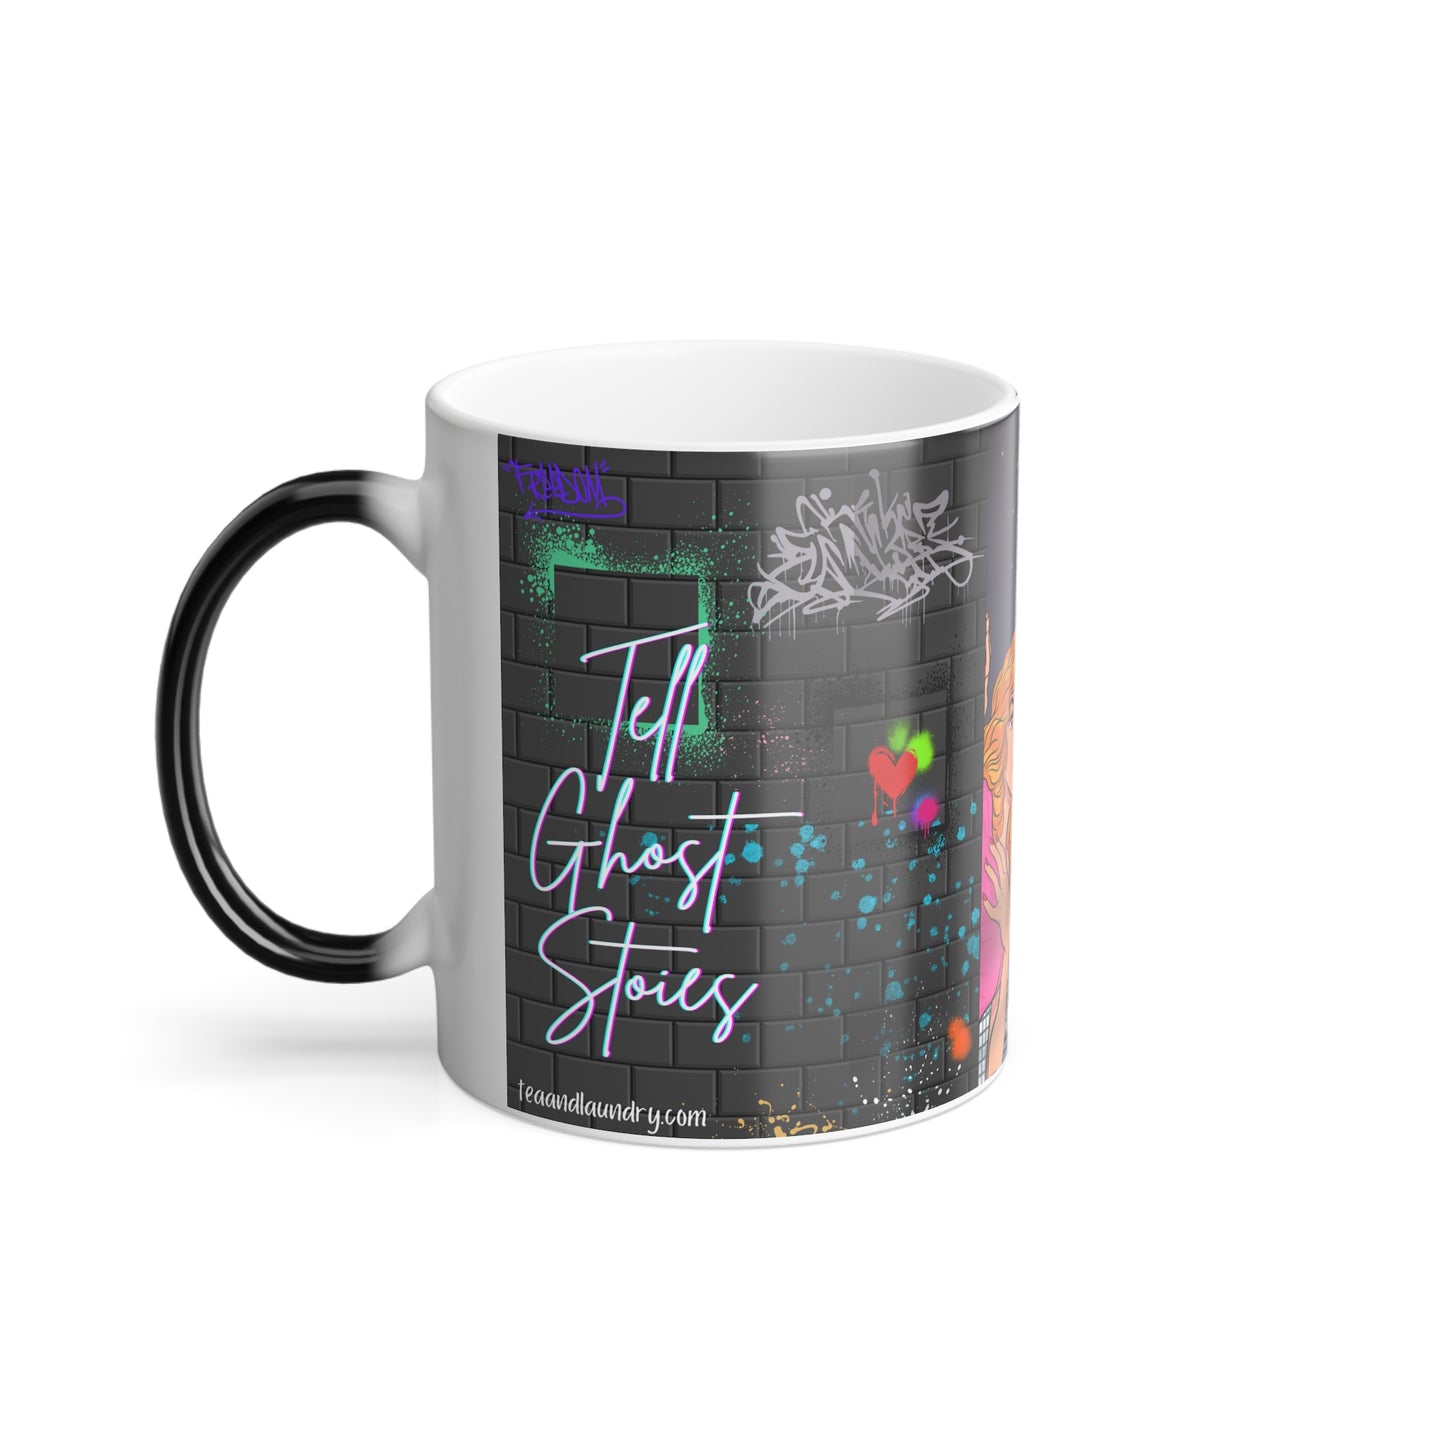 "Tell Ghost Stories" Color Morphing Mug, 11oz